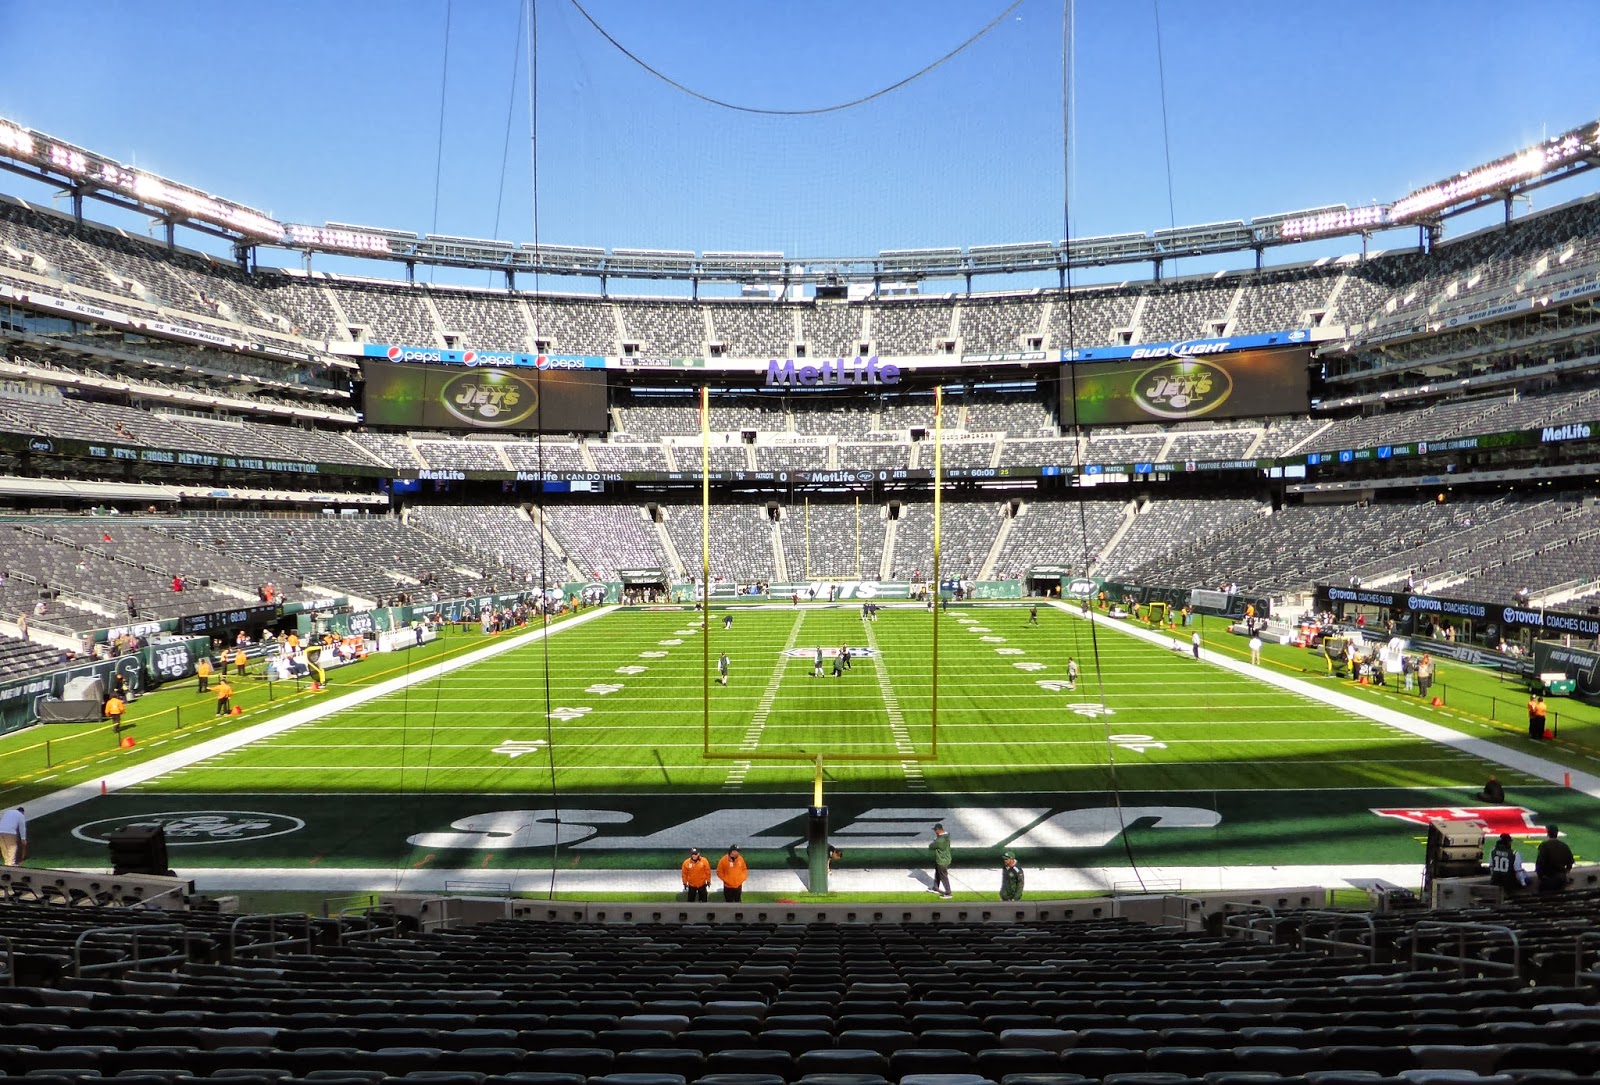 Sports Road Trips: New England Patriots 27 at New York Jets 30 (OT) -  October 20, 2013